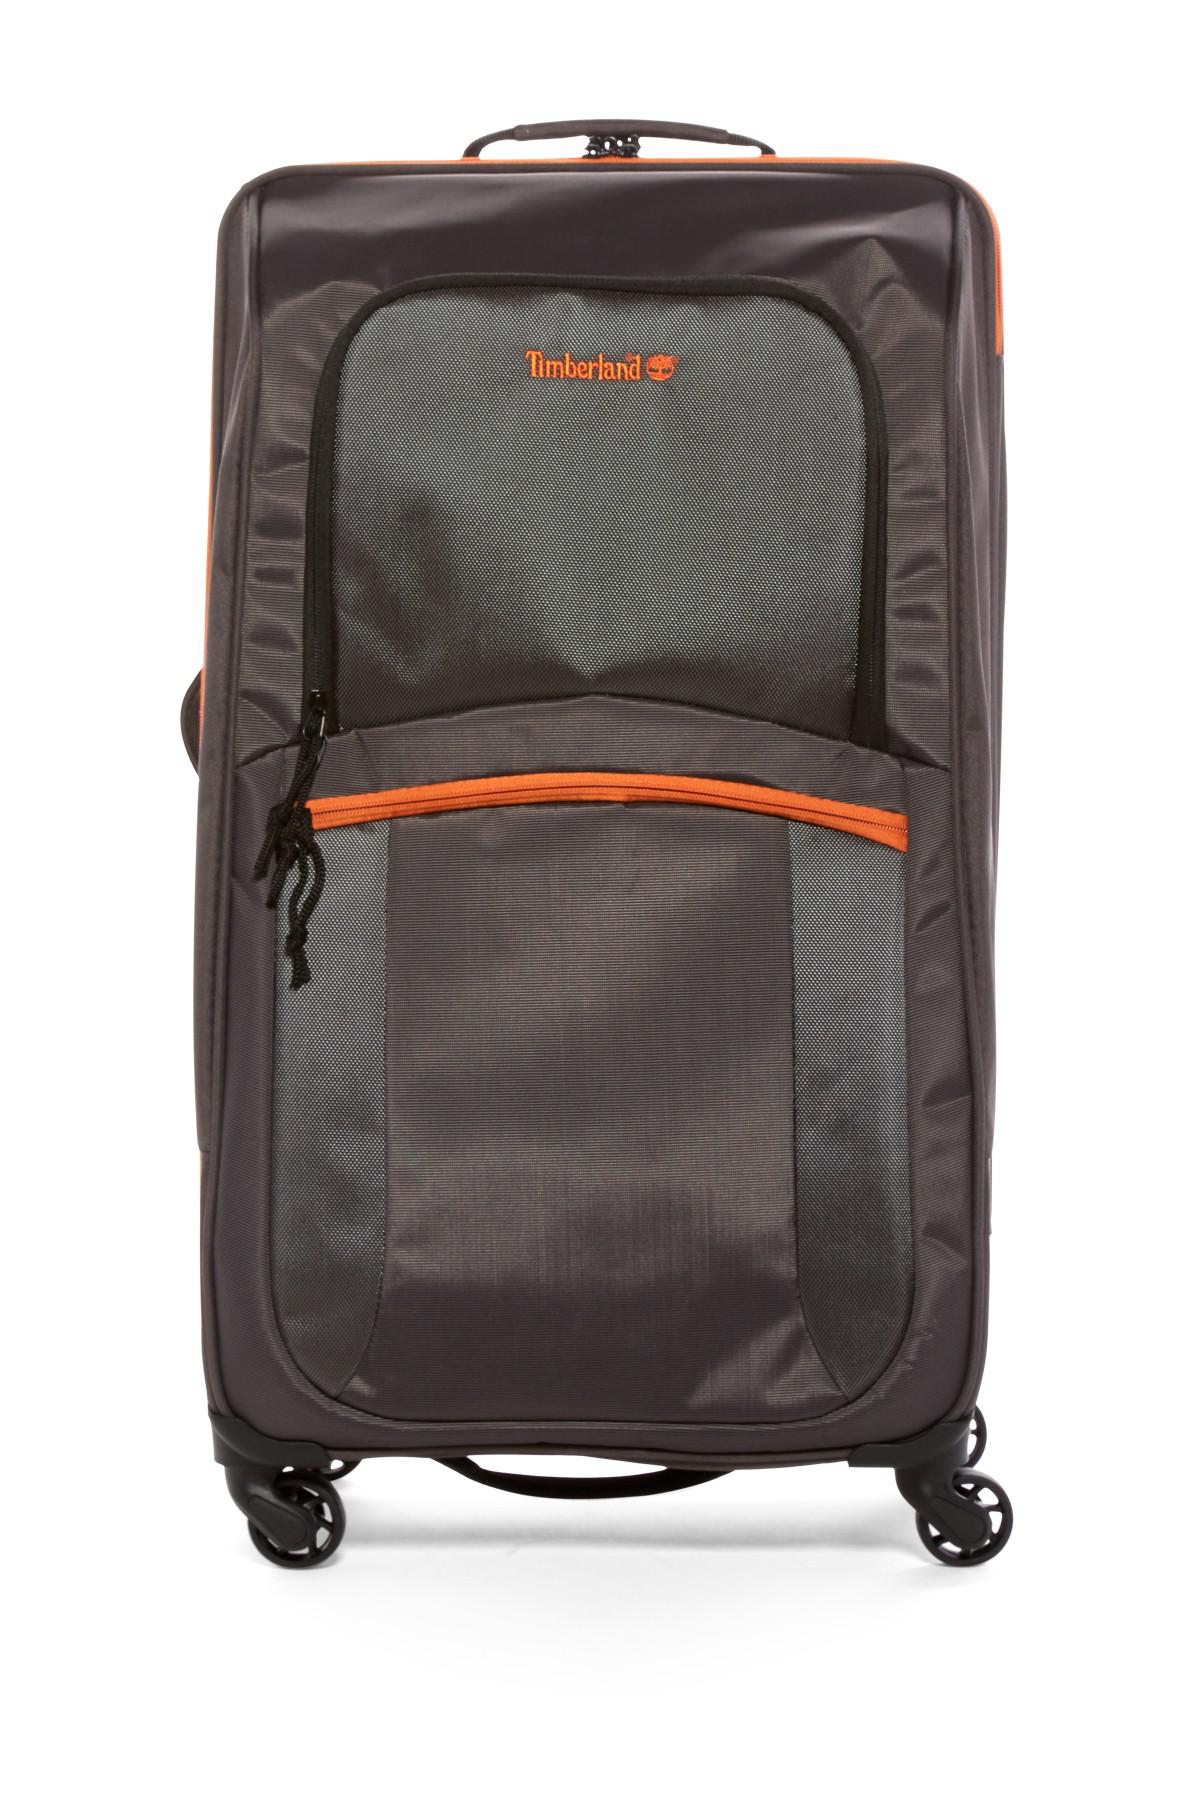 Timberland Synthetic Bay Circuit 30" Expandable Spinner Suitcase in Dark  Grey (Gray) for Men - Lyst